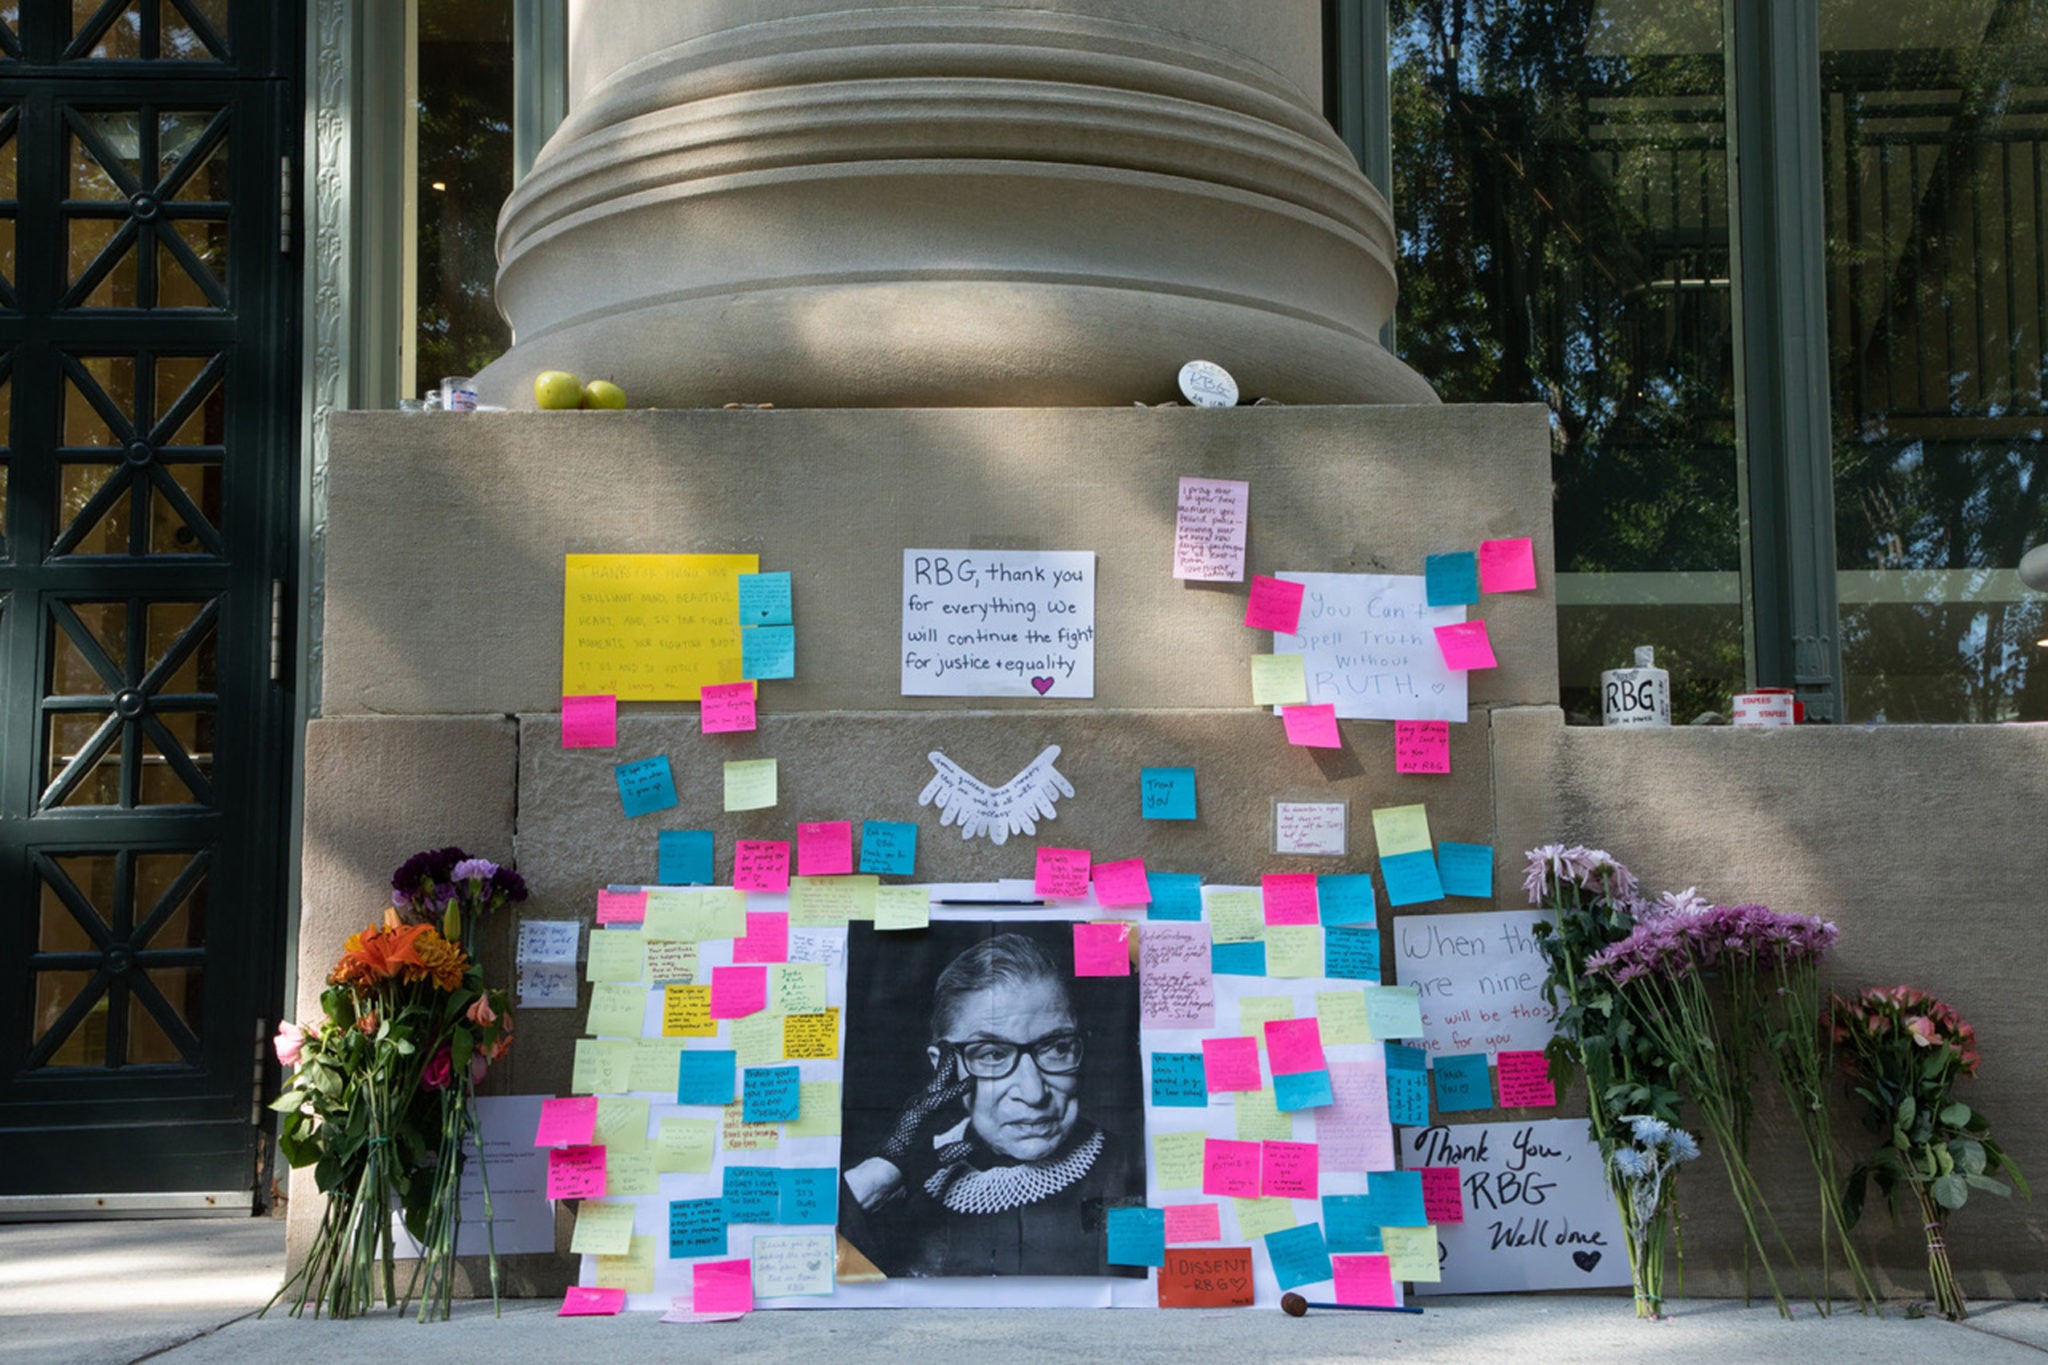 A memorial to Ruth Bader Ginsberg on the steps of an HLS building.